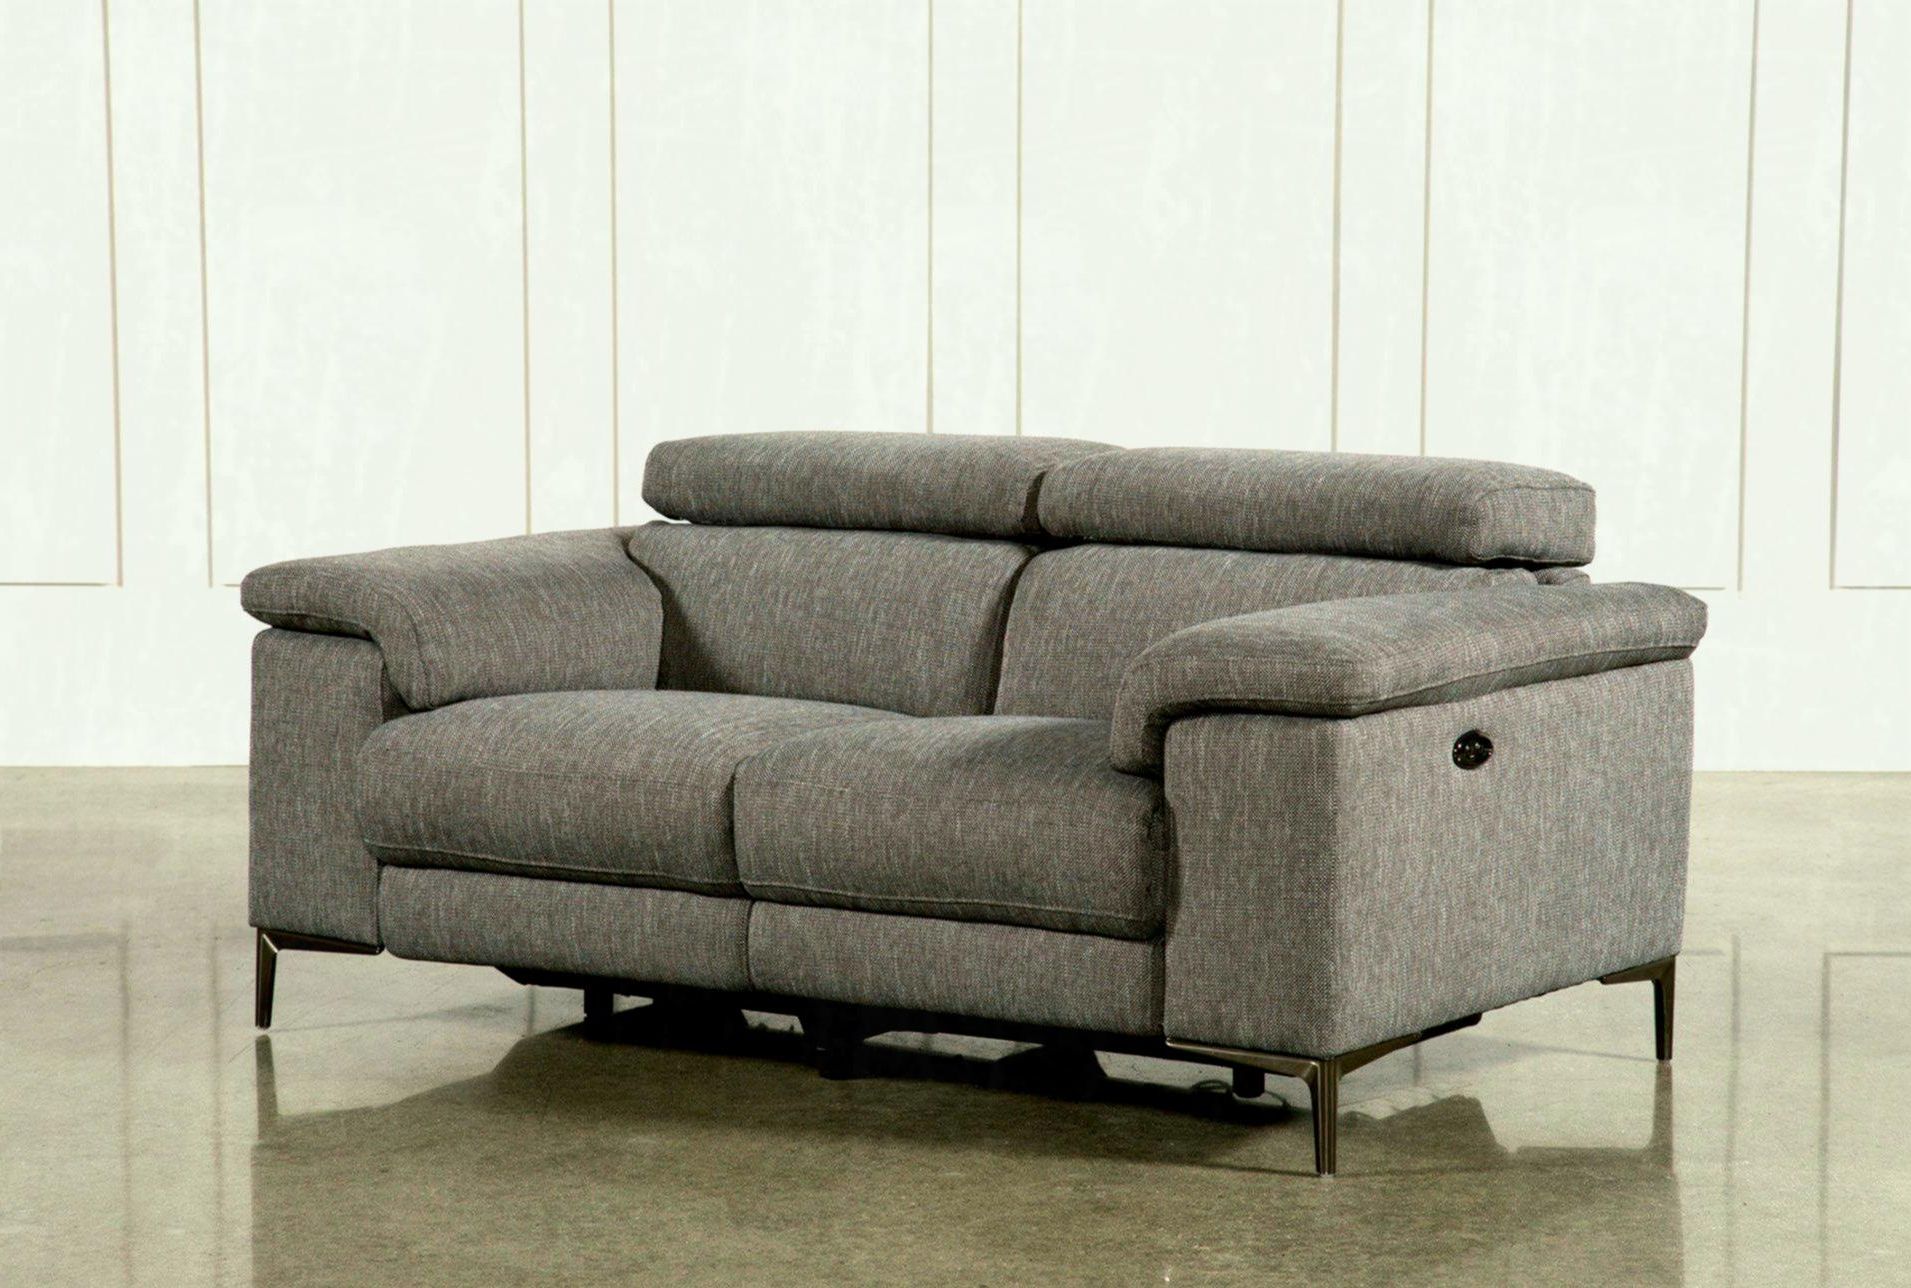 Delano 2 Piece Sectionals With Laf Oversized Chaise Regarding Best And Newest Added To Cart Delano Piece Sectional W Laf Oversized Chaise Living (View 10 of 20)